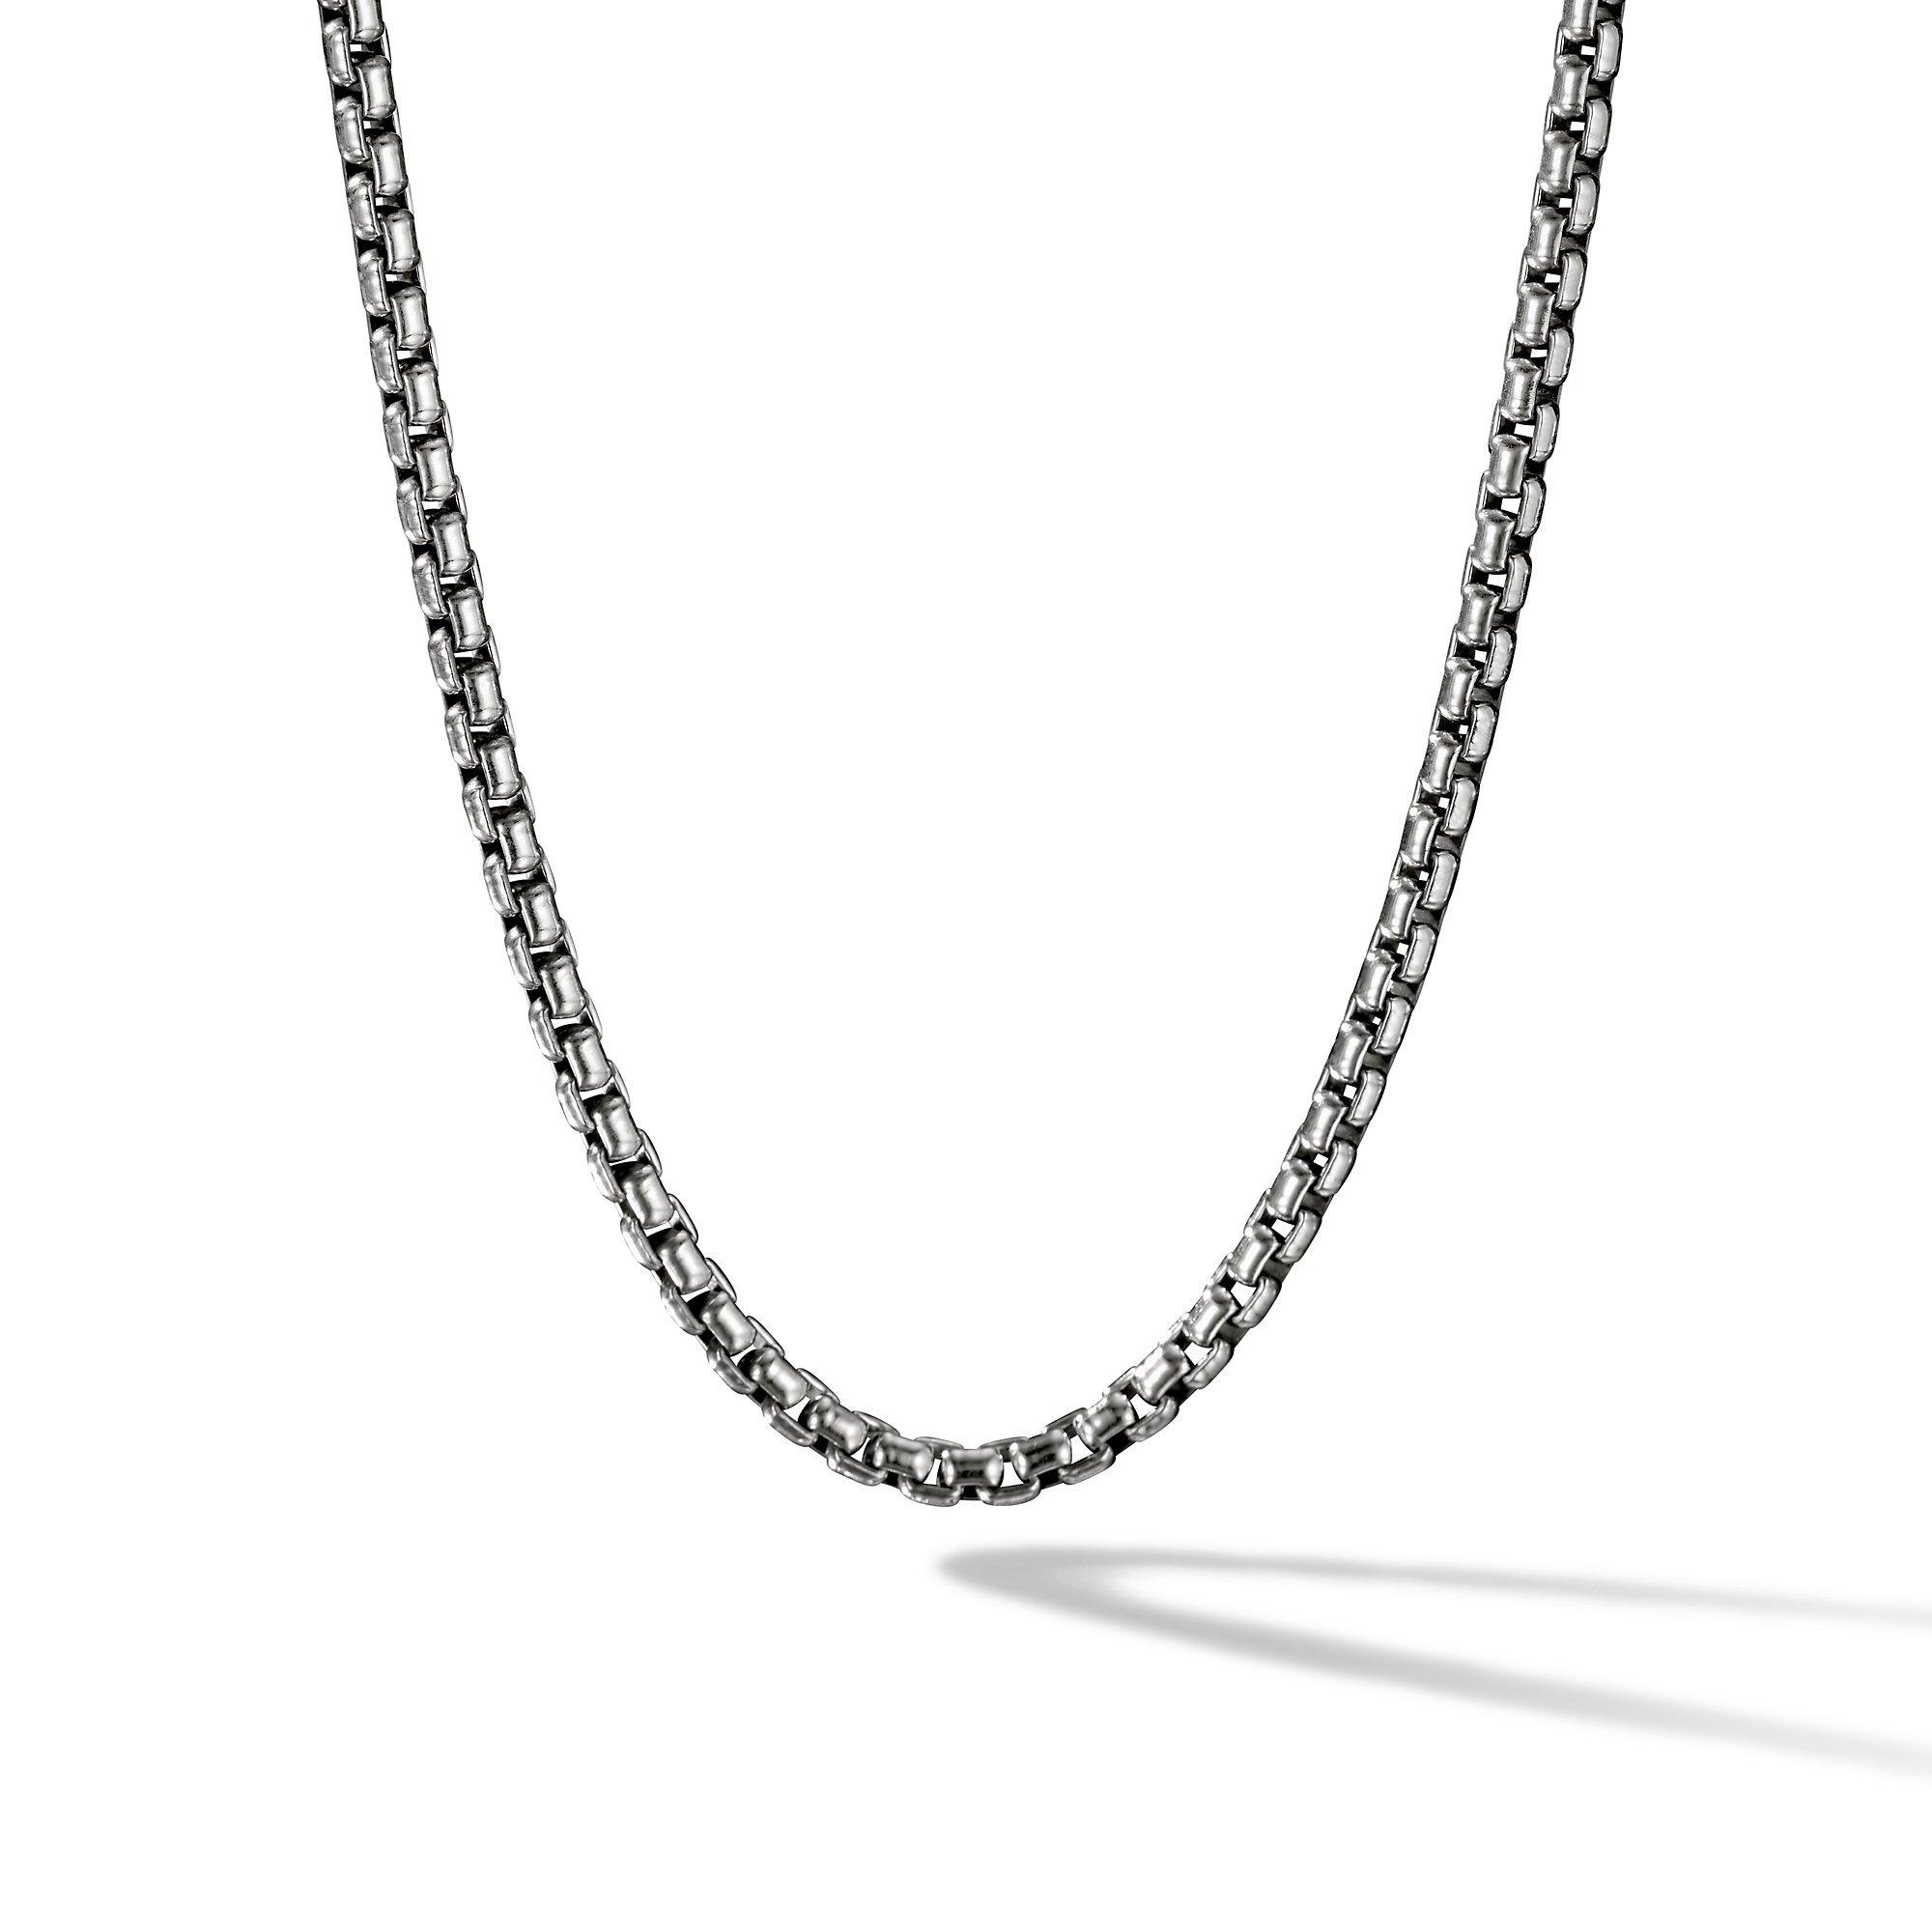 David Yurman Men's 3.6mm Box Chain Necklace in Sterling Silver, 20 inches